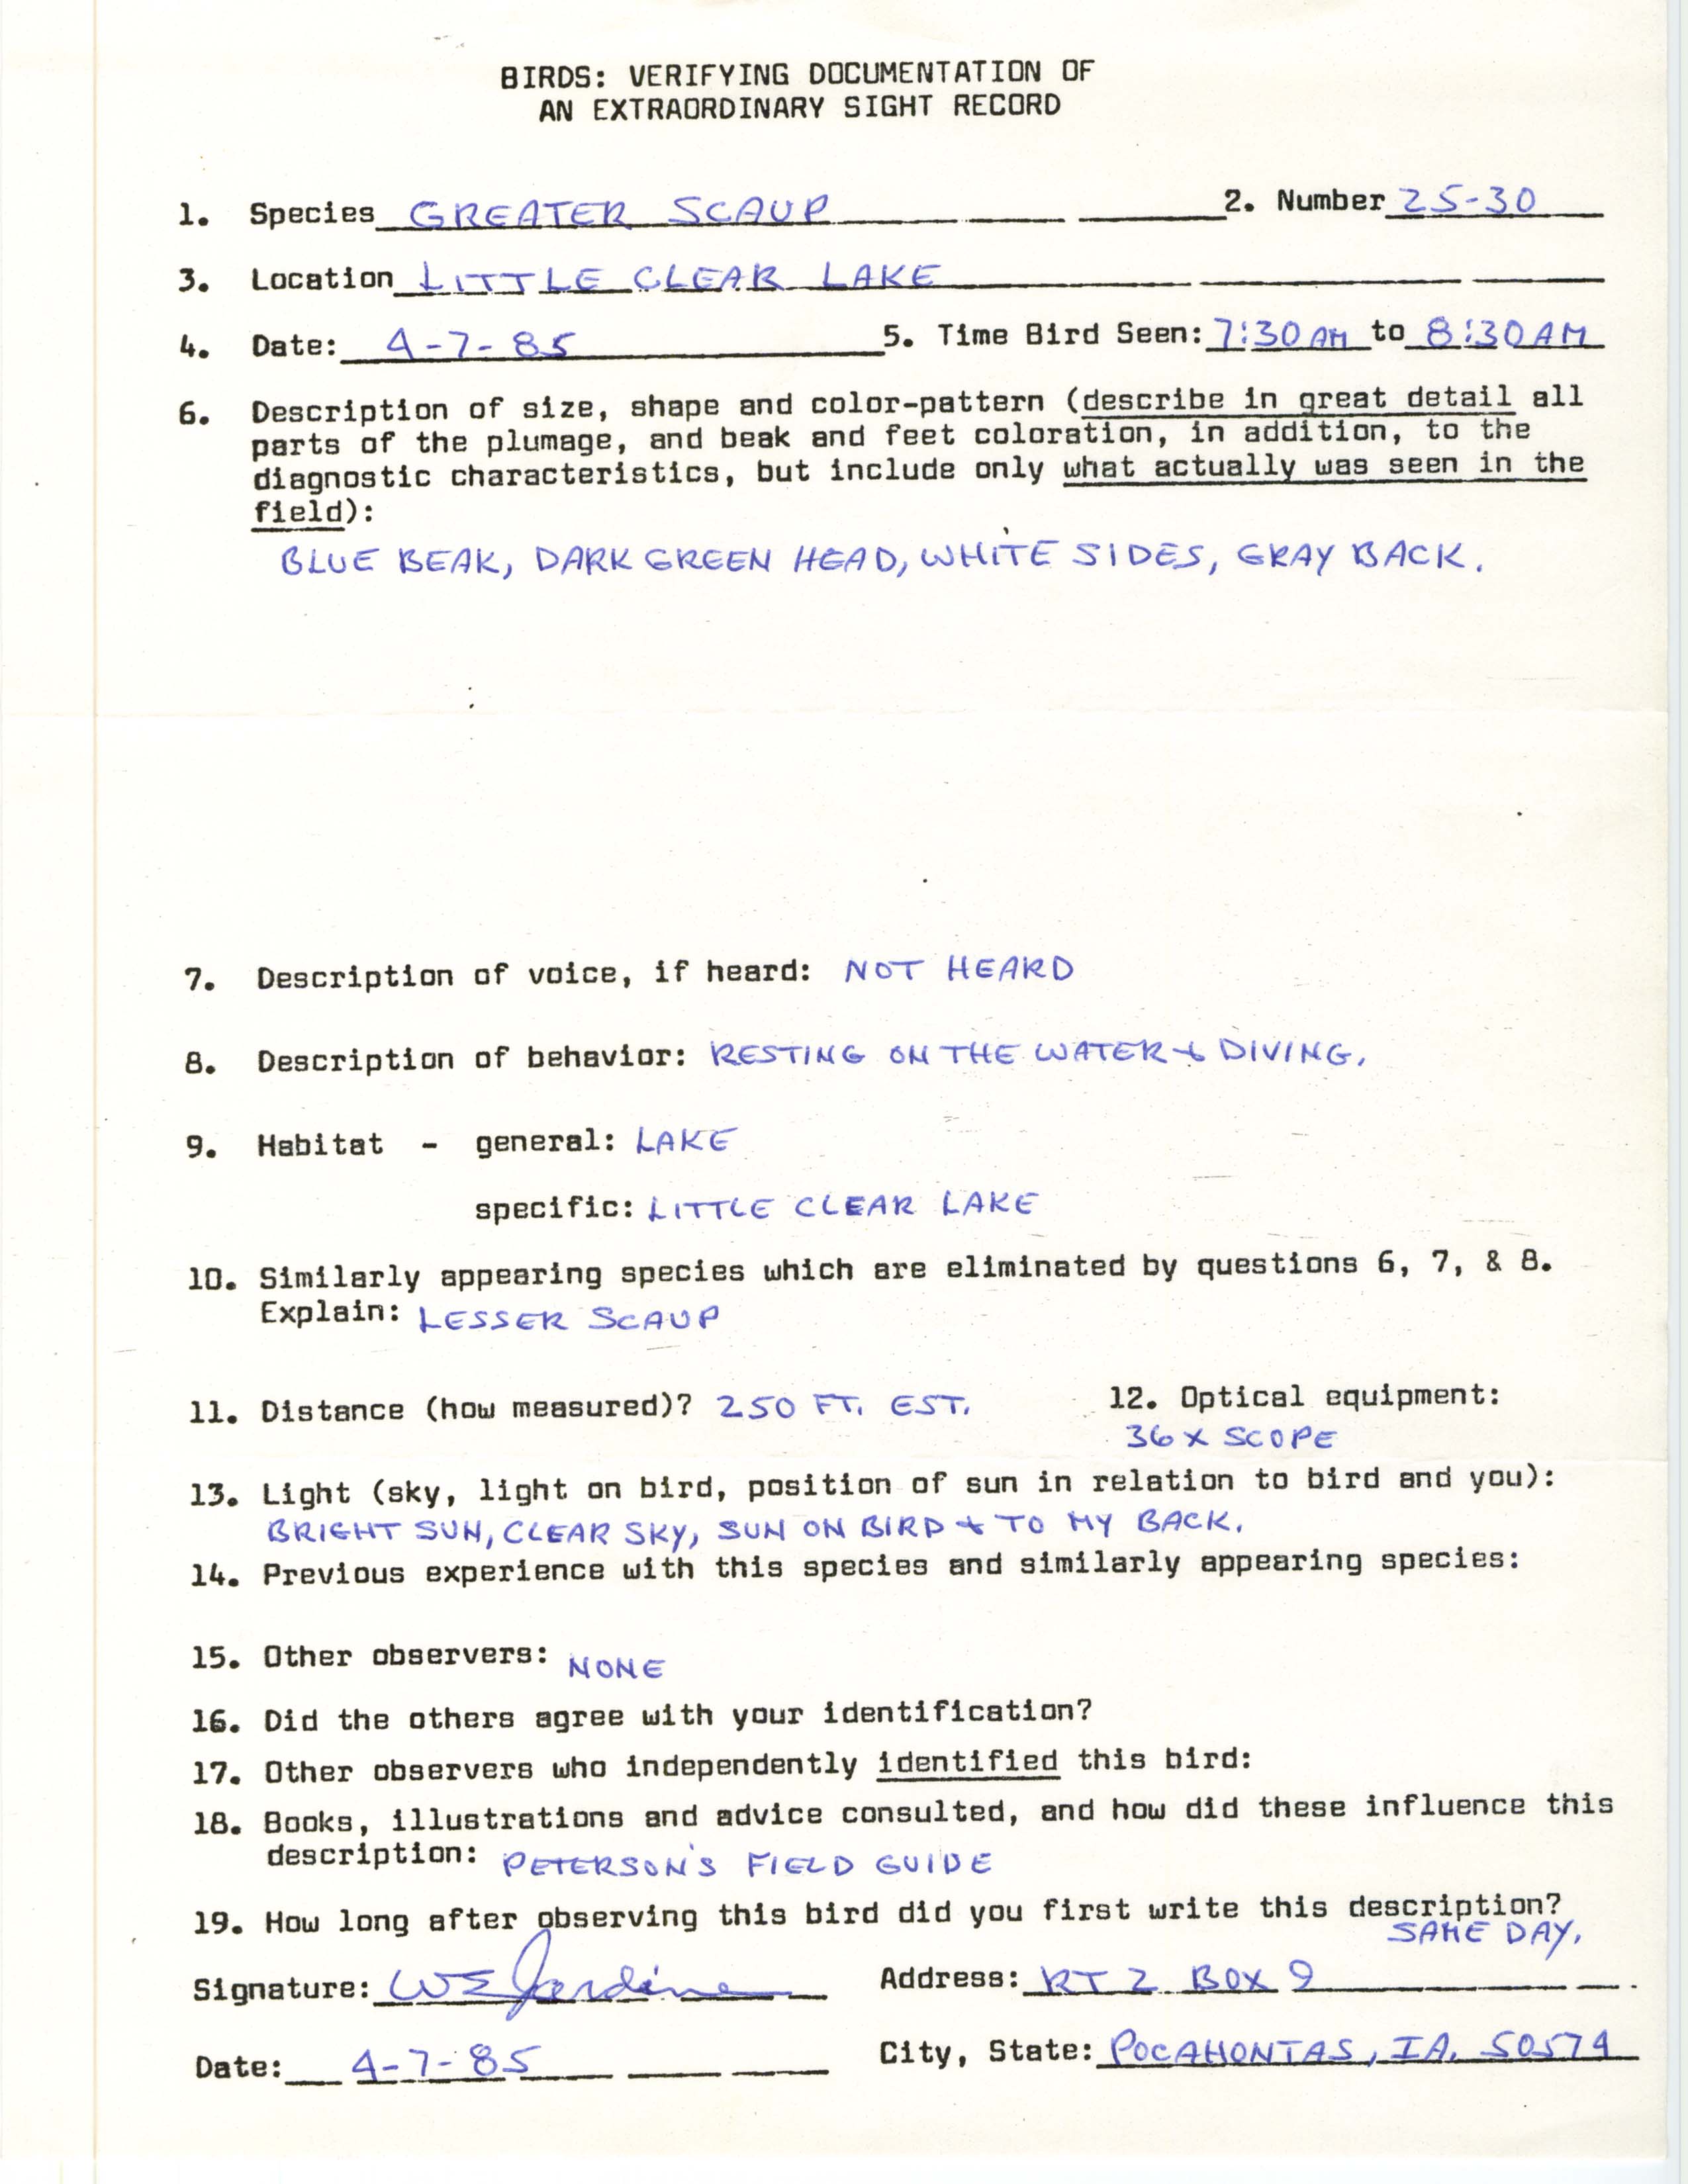 Rare bird documentation form for Greater Scaup at Little Clear Lake in 1985